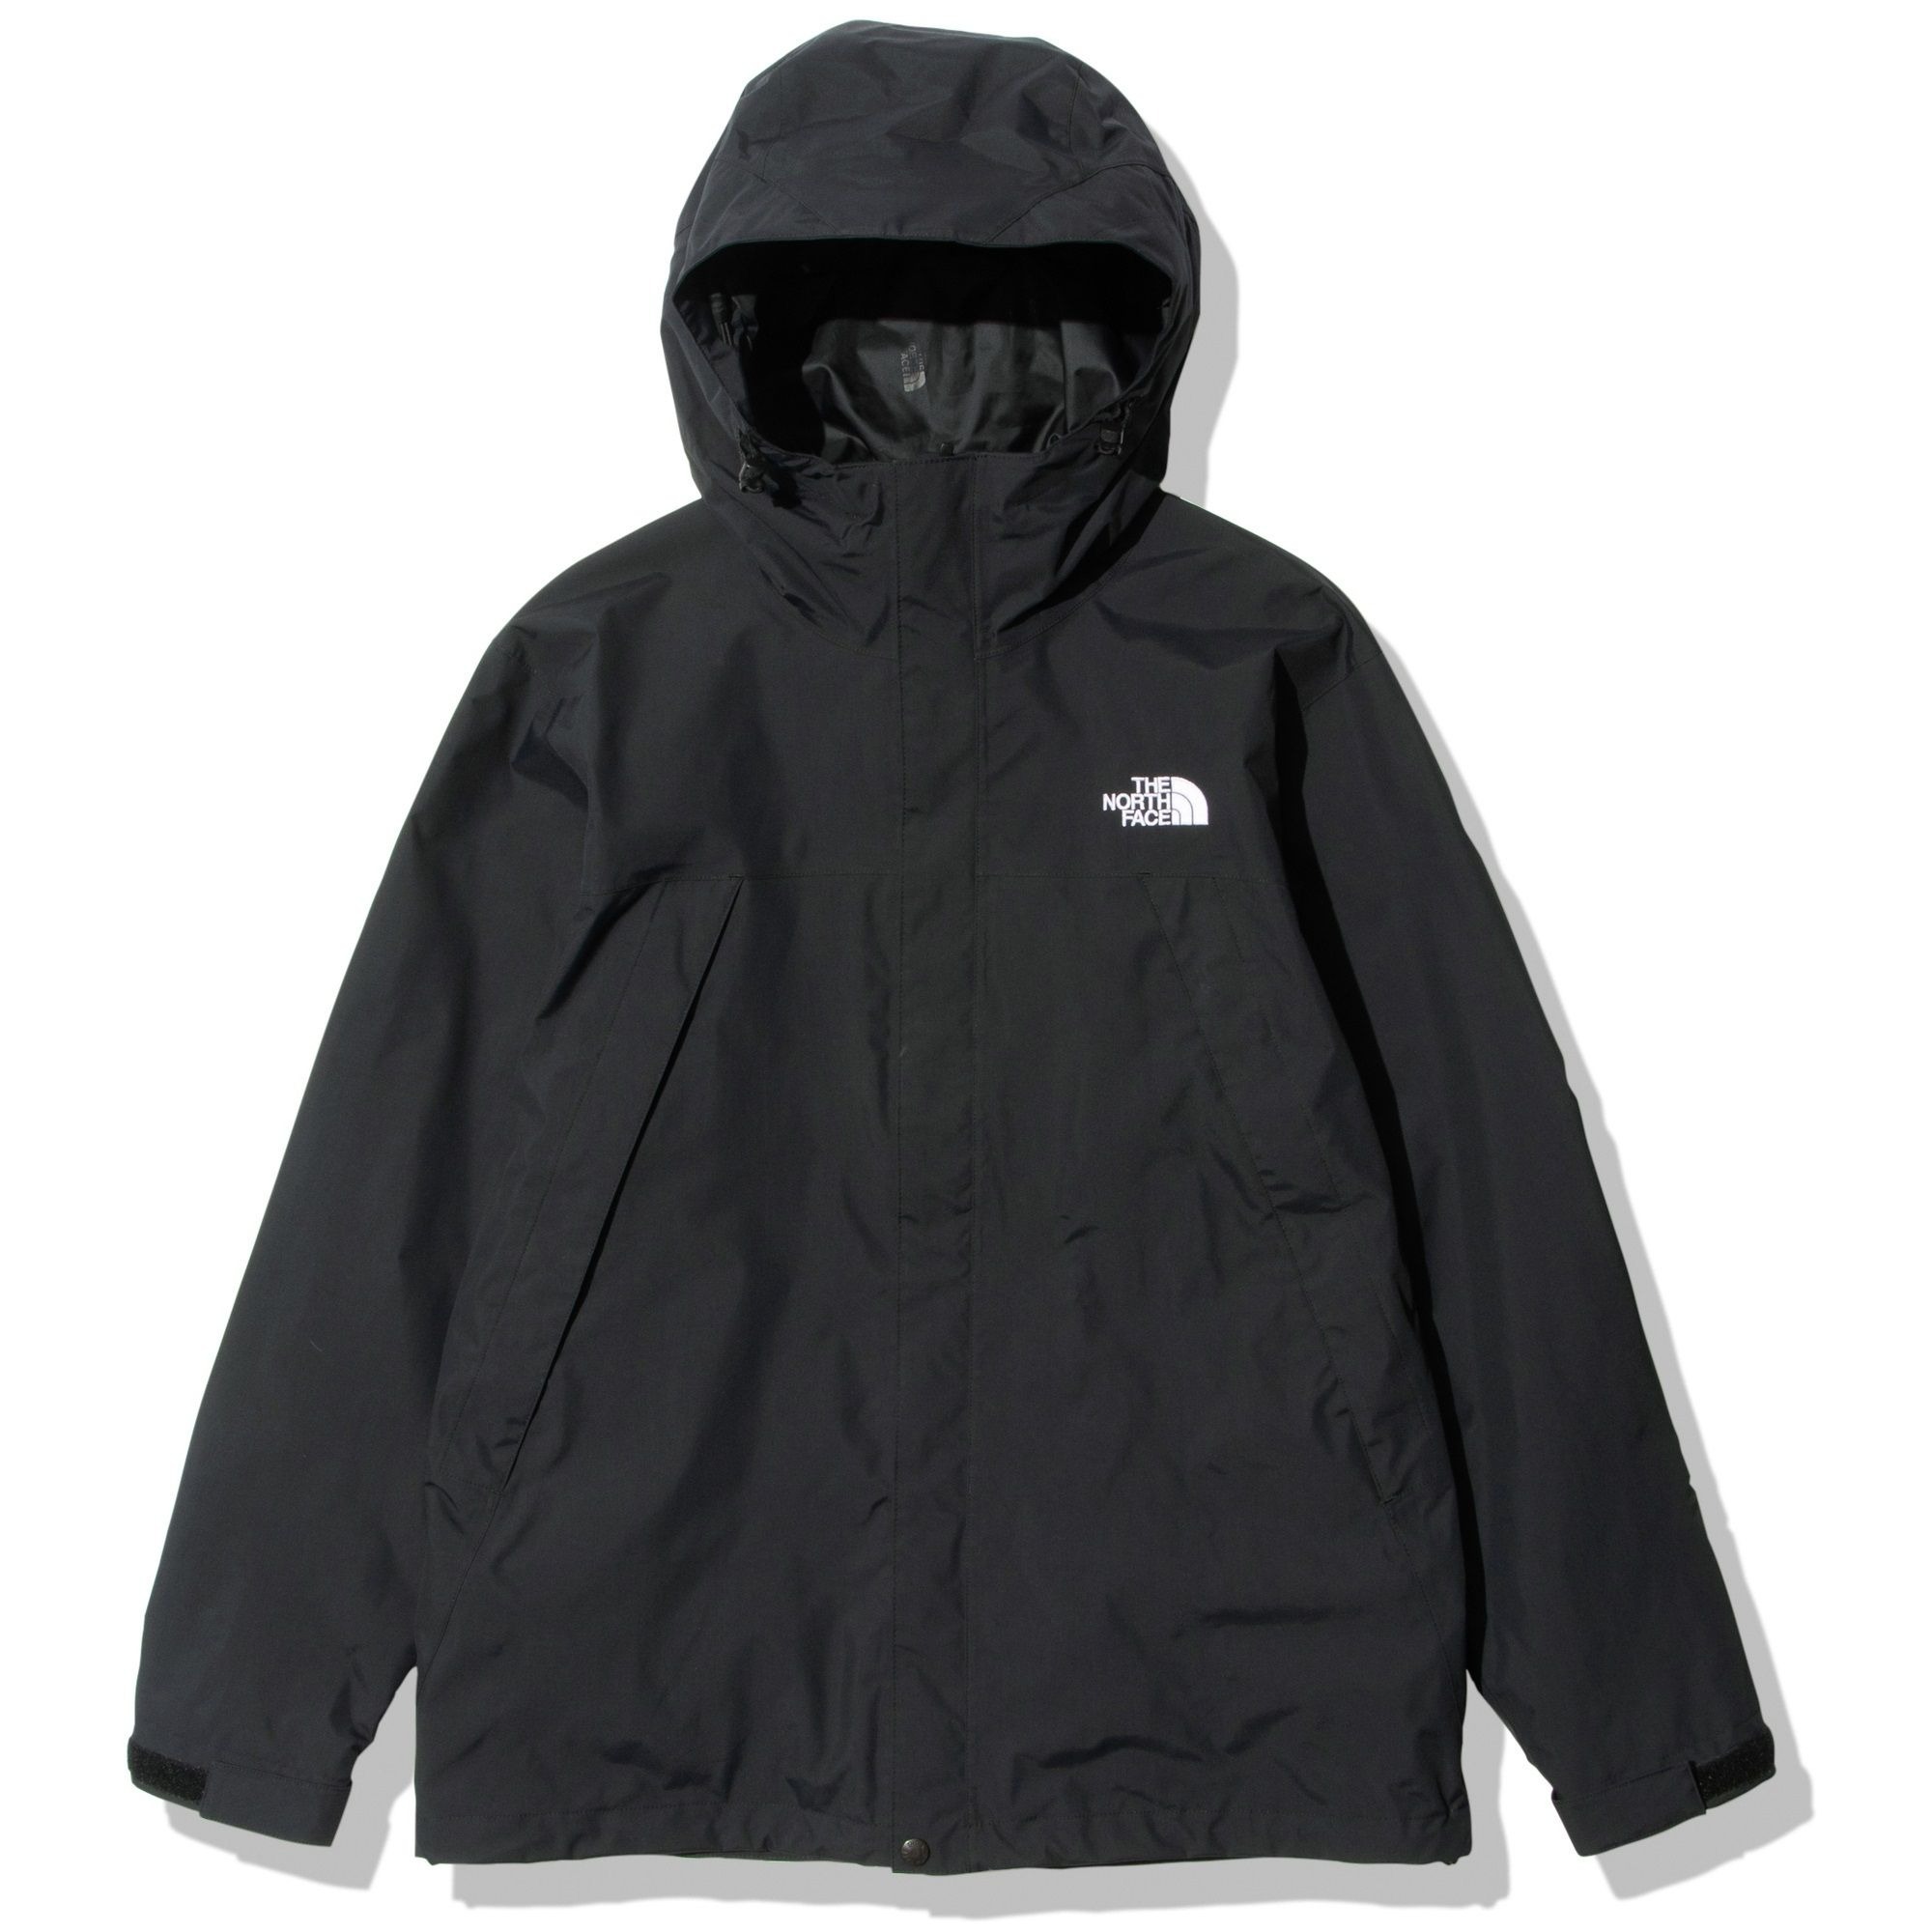 NP62233 日本THE NORTH FACE SCOOP JACKET 連帽外套